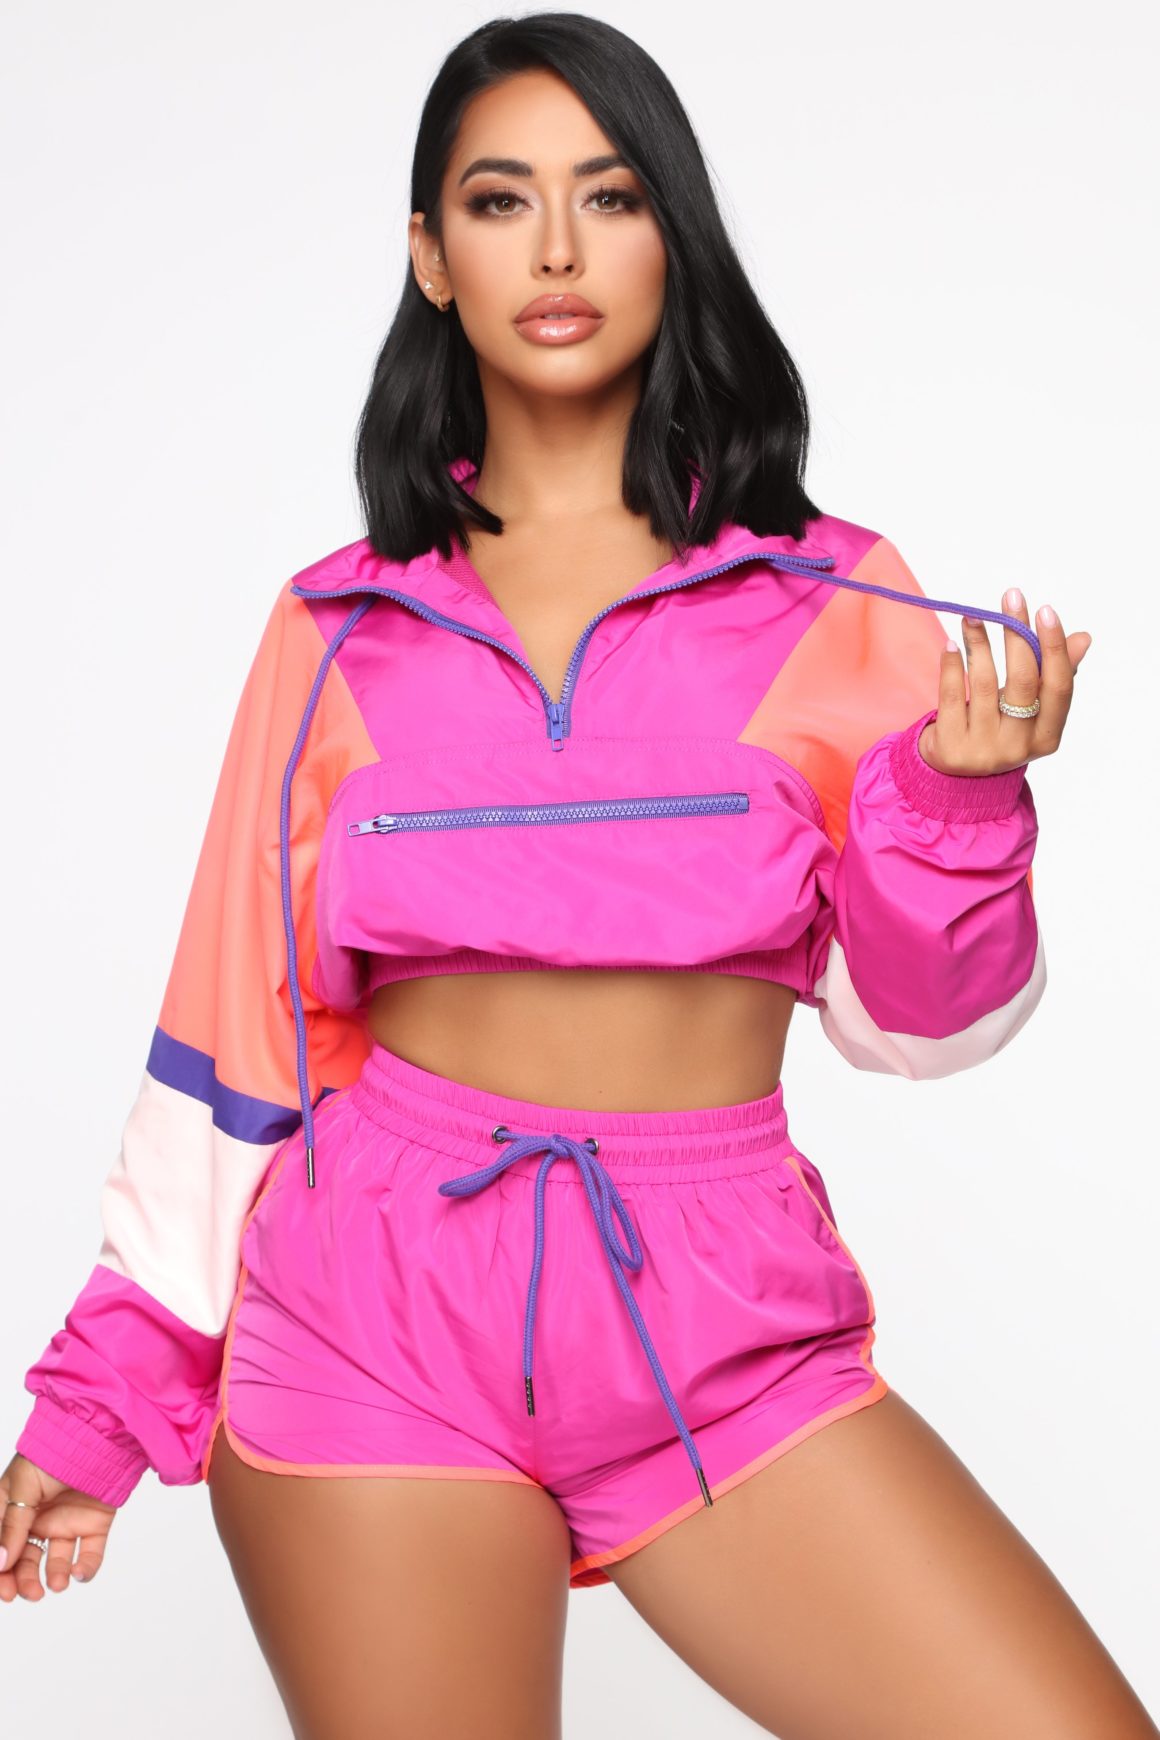 Fashion Nova releases bizarre pair of $50 cage trousers 